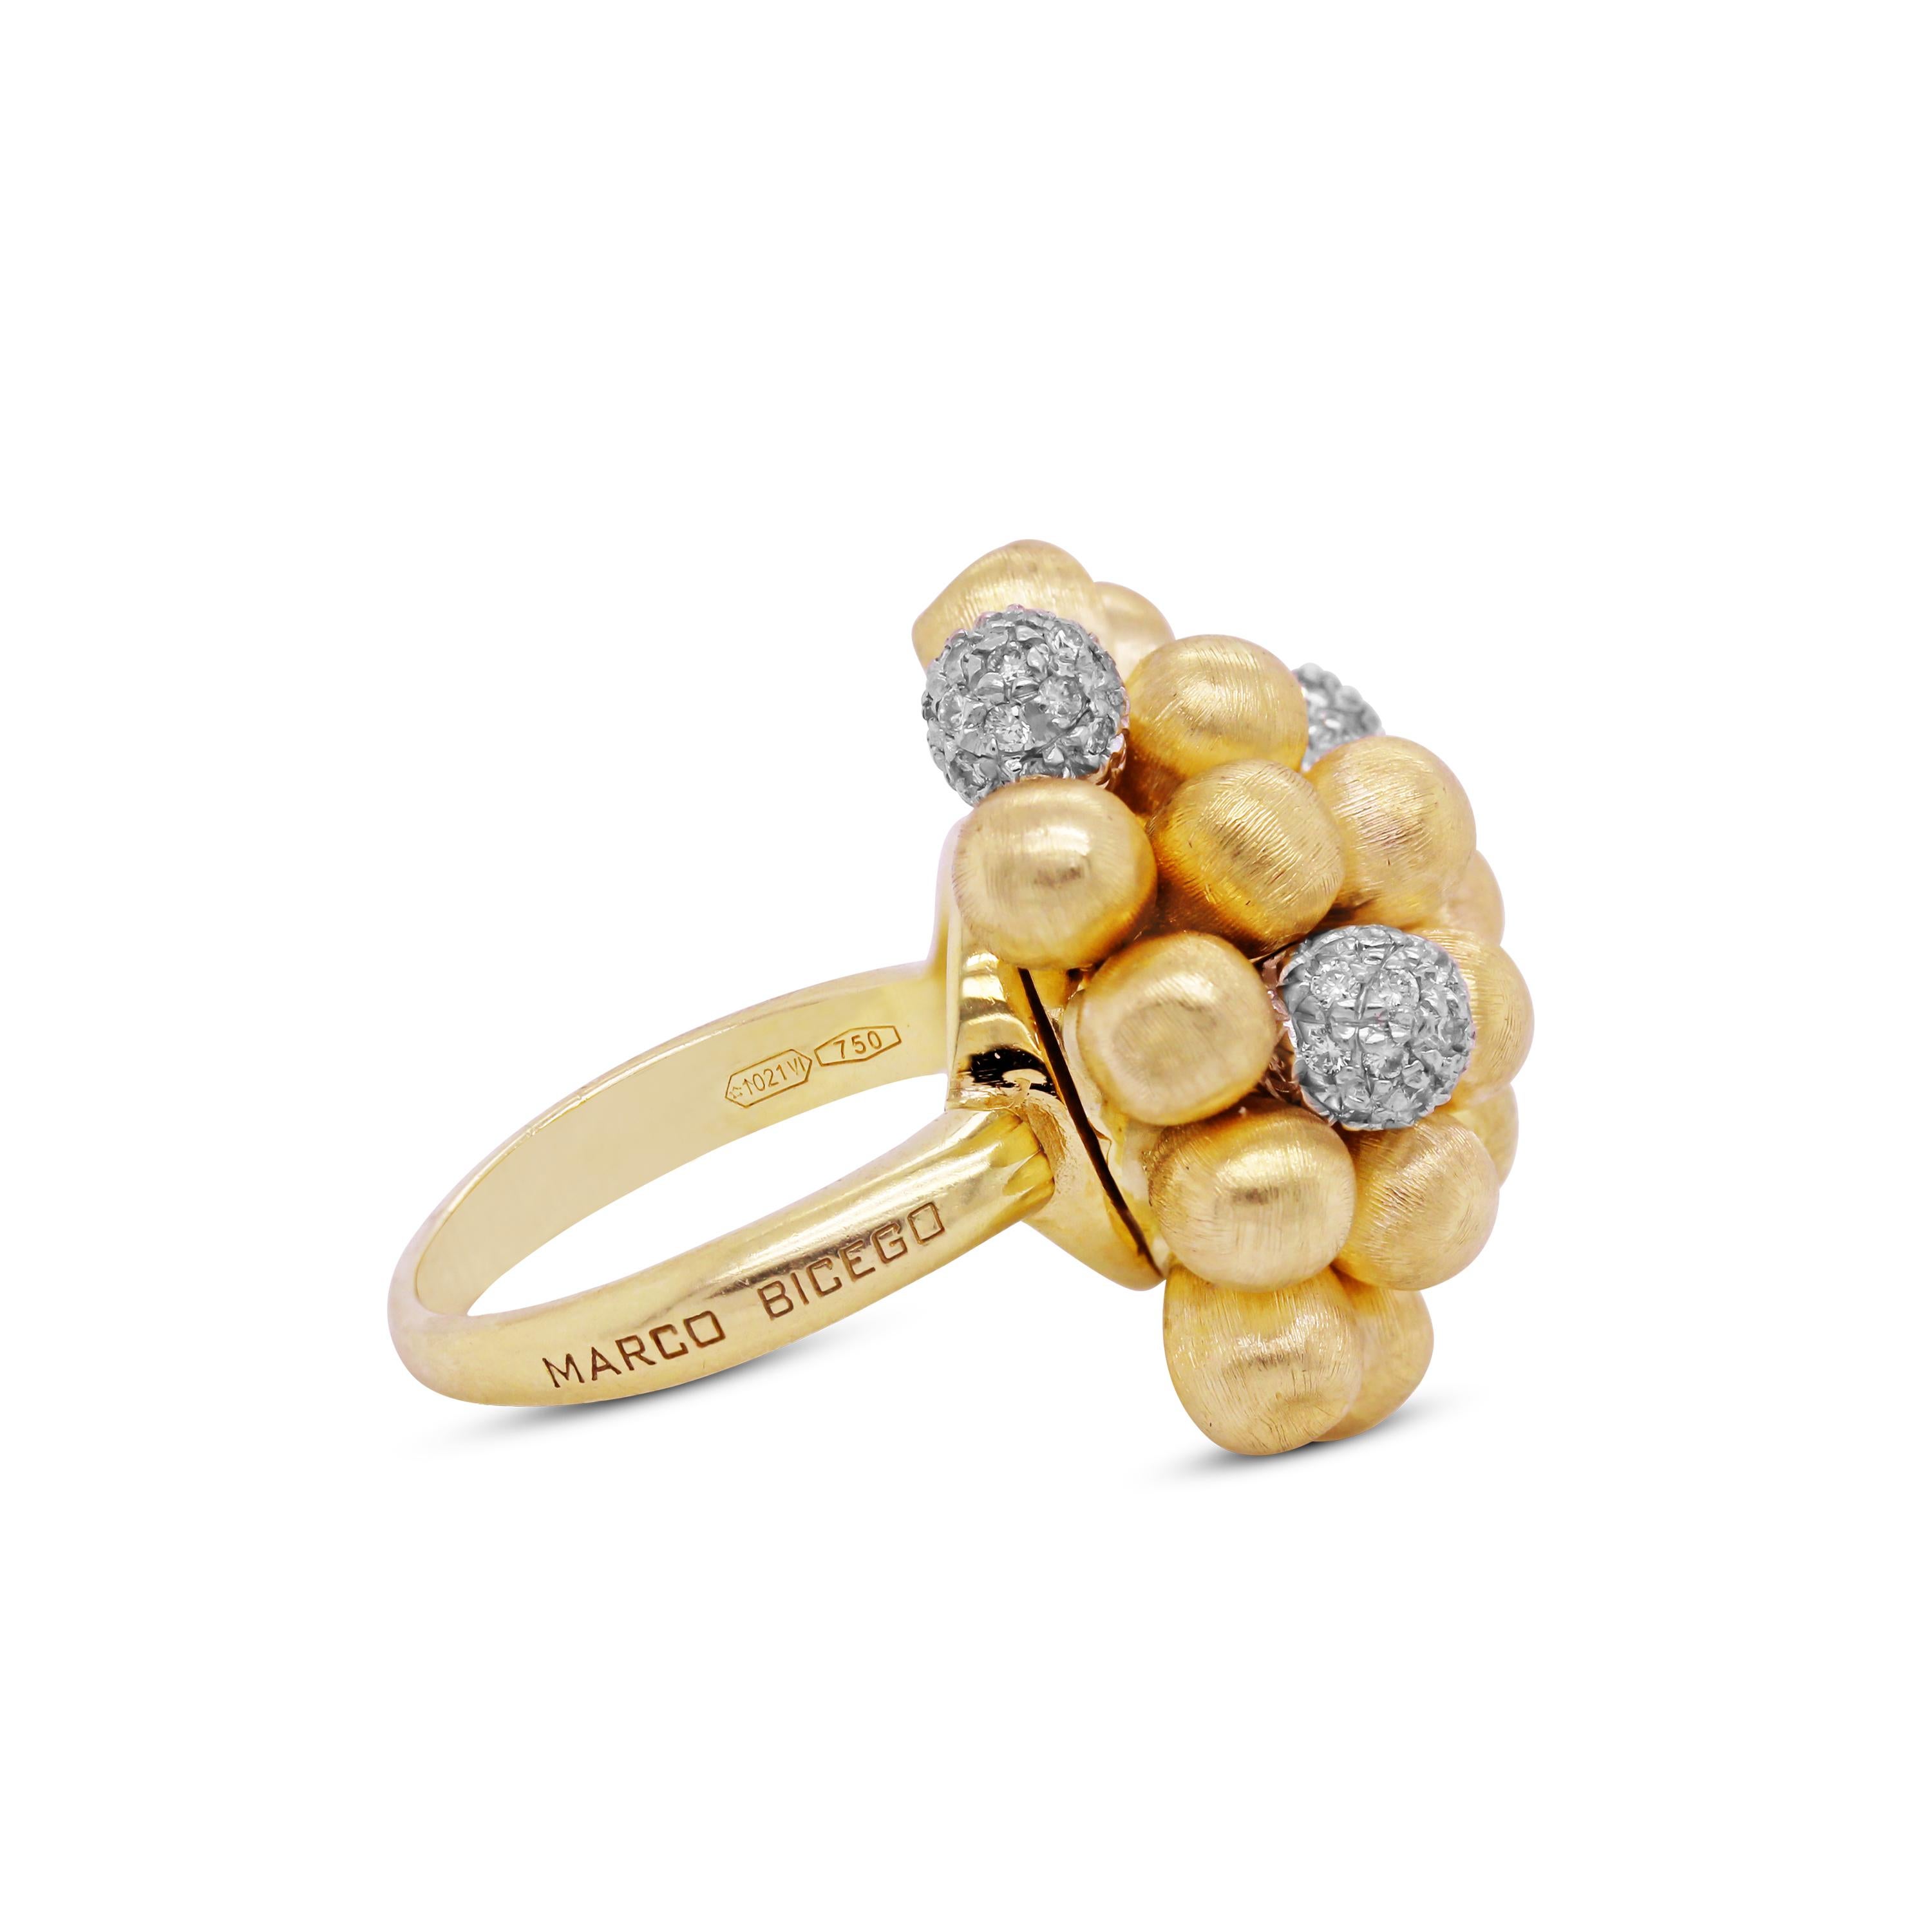 18K Yellow and White Gold Ring with Diamonds by Marco Bicego

This ring features round balls in the center. The yellow is brushed, matte finished while the white gold features diamonds

Apprx. 0.80 carat G color, VS clarity diamonds total